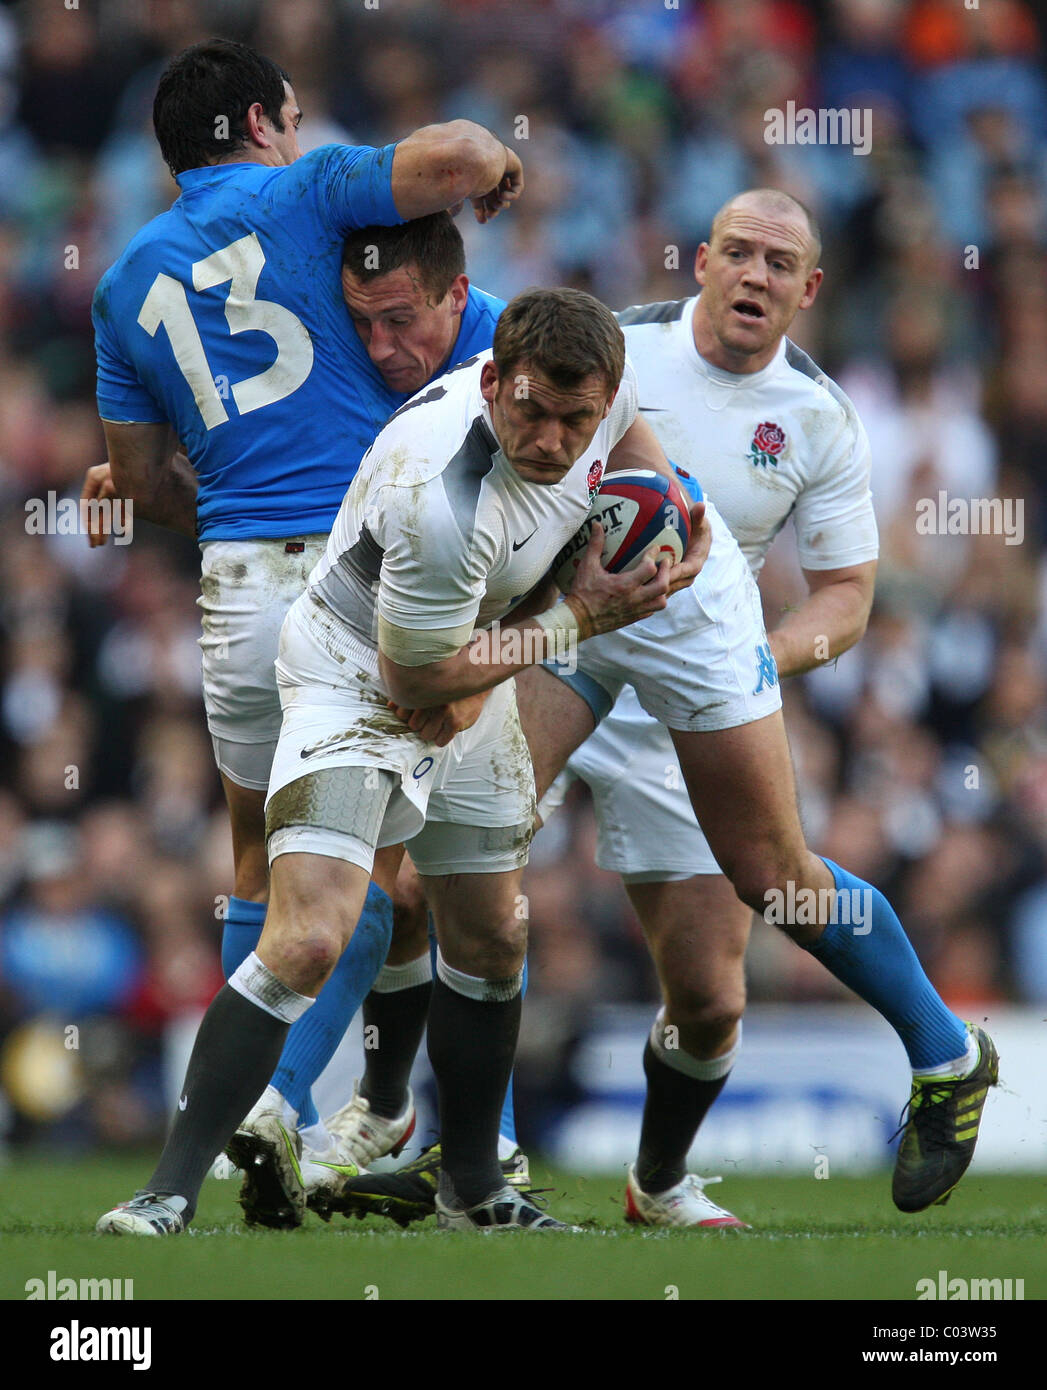 12.02.2011 RBS 6 Nations Rugby Union from Twickenham. England v Italy. M. Cueto of England in action. Stock Photo